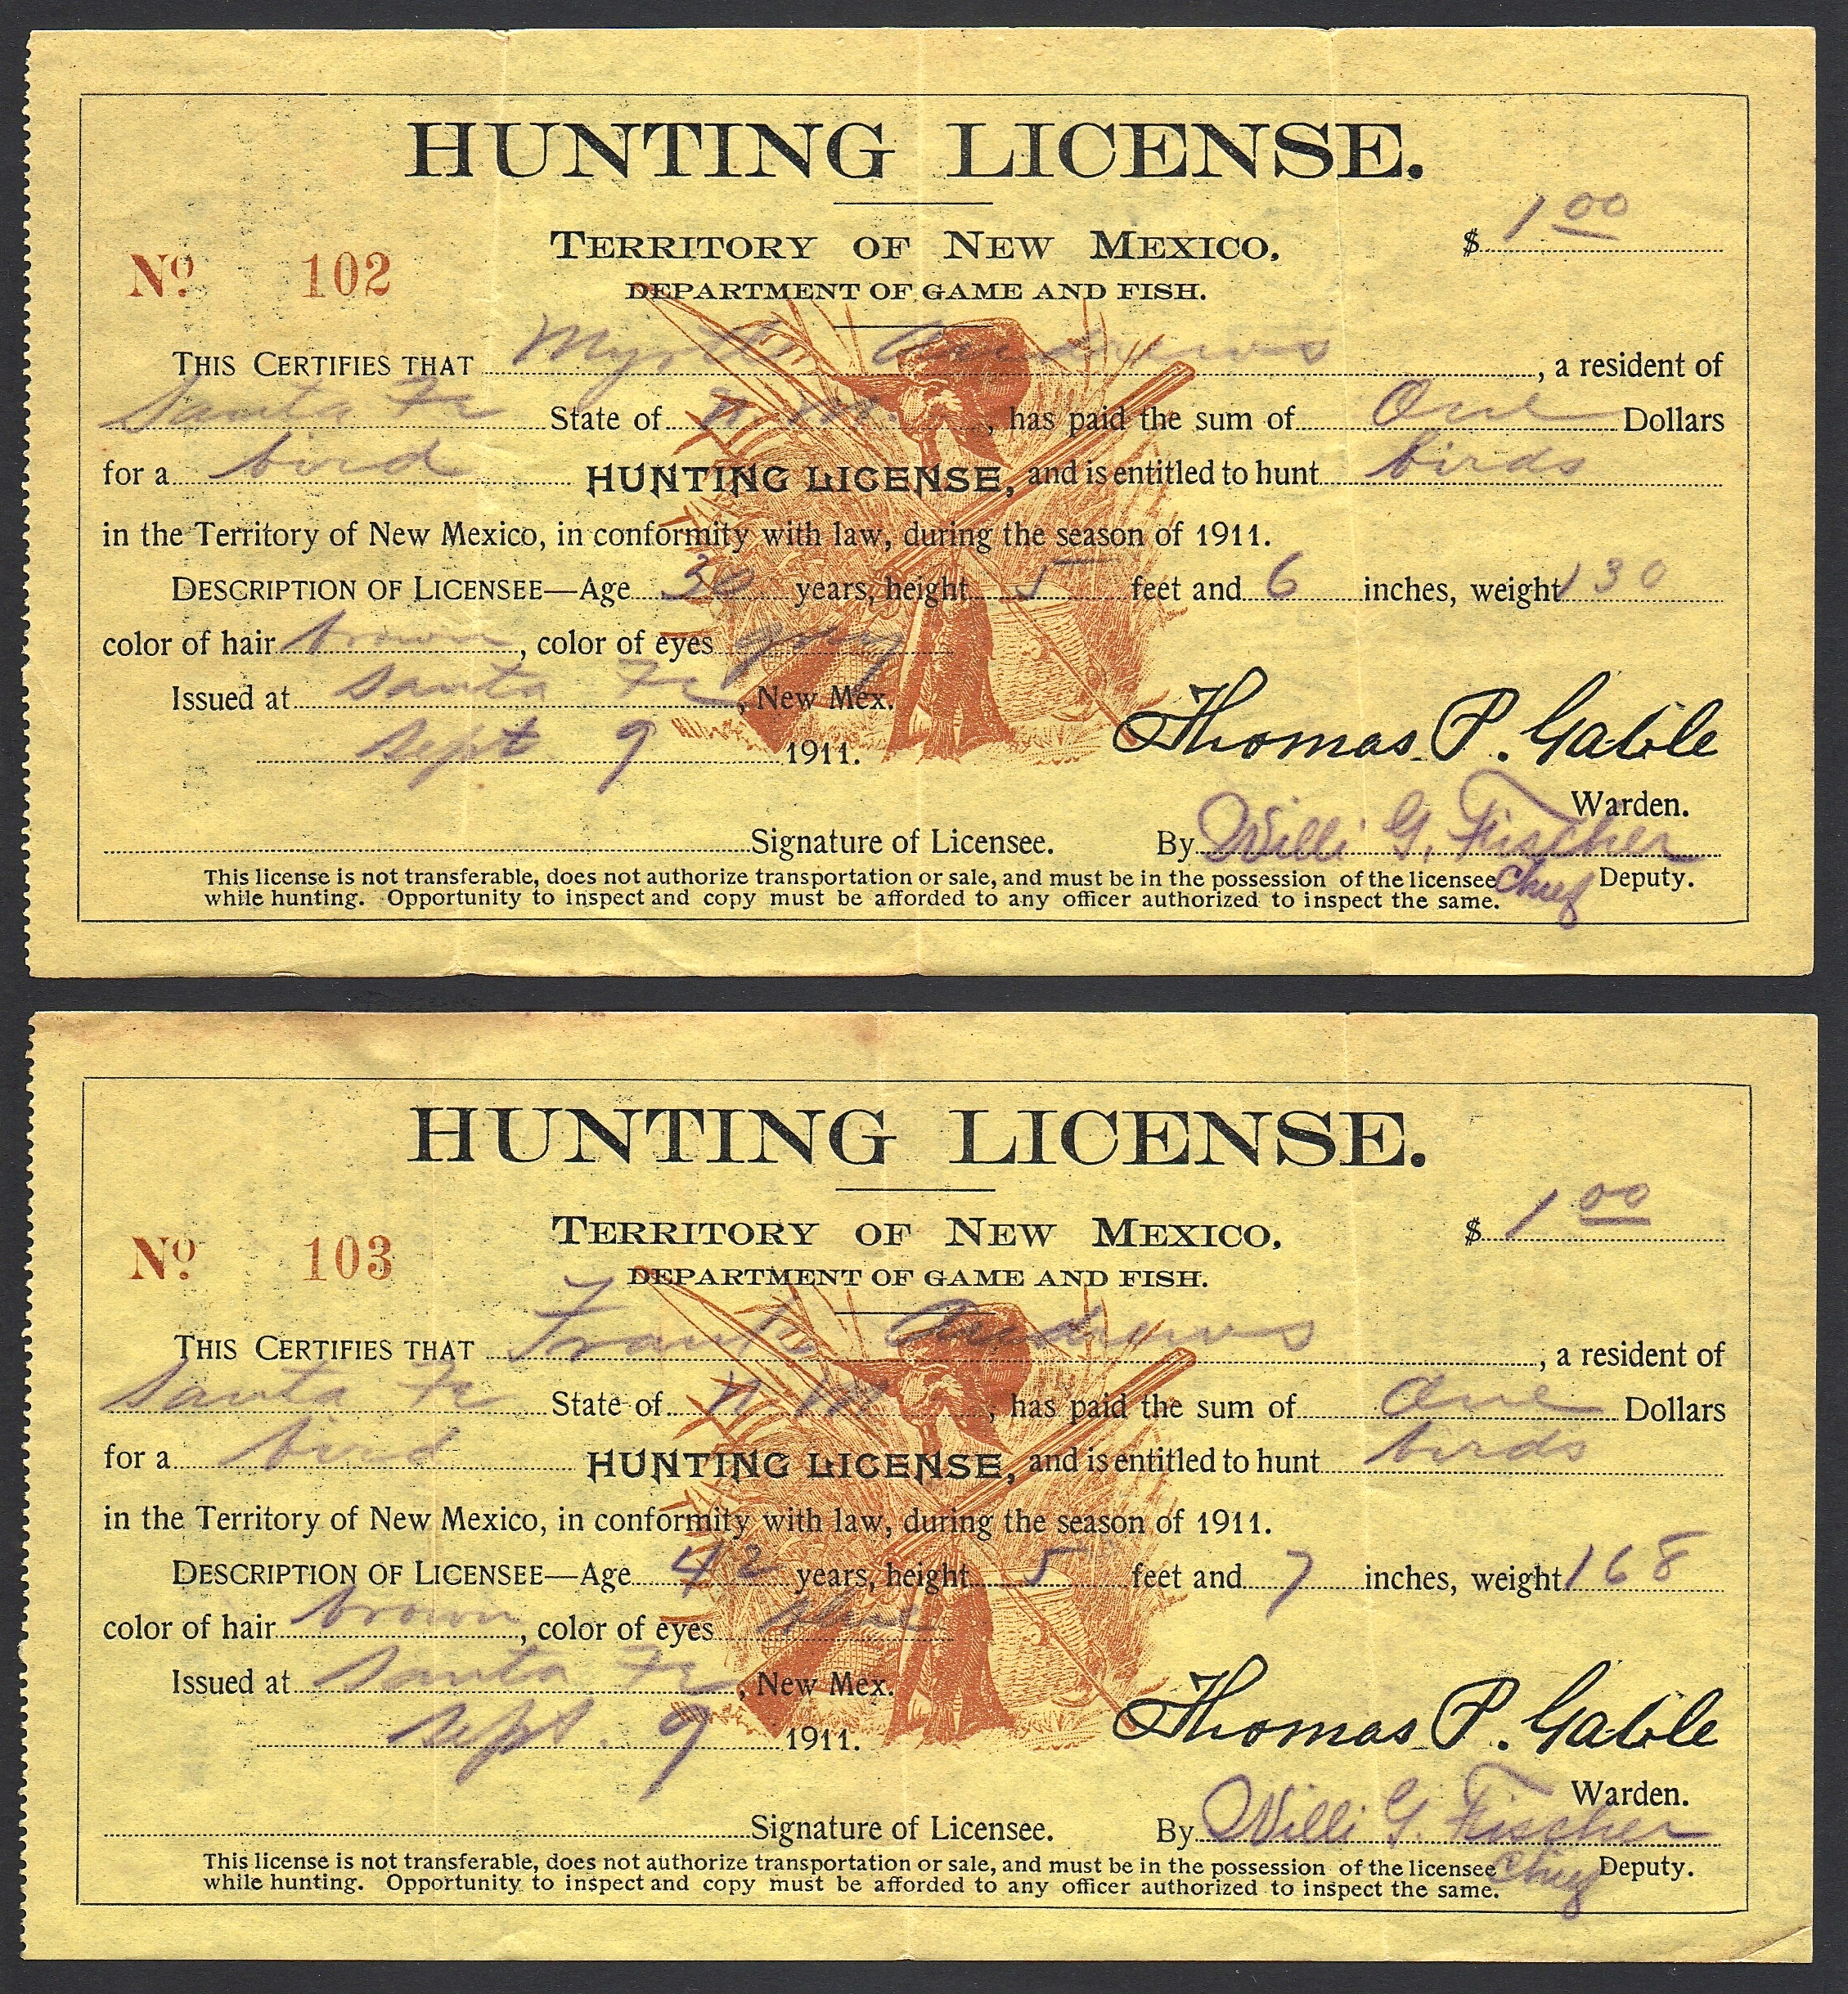 Husband & Wife 1911 Territory of New Mexico Hunting Licenses